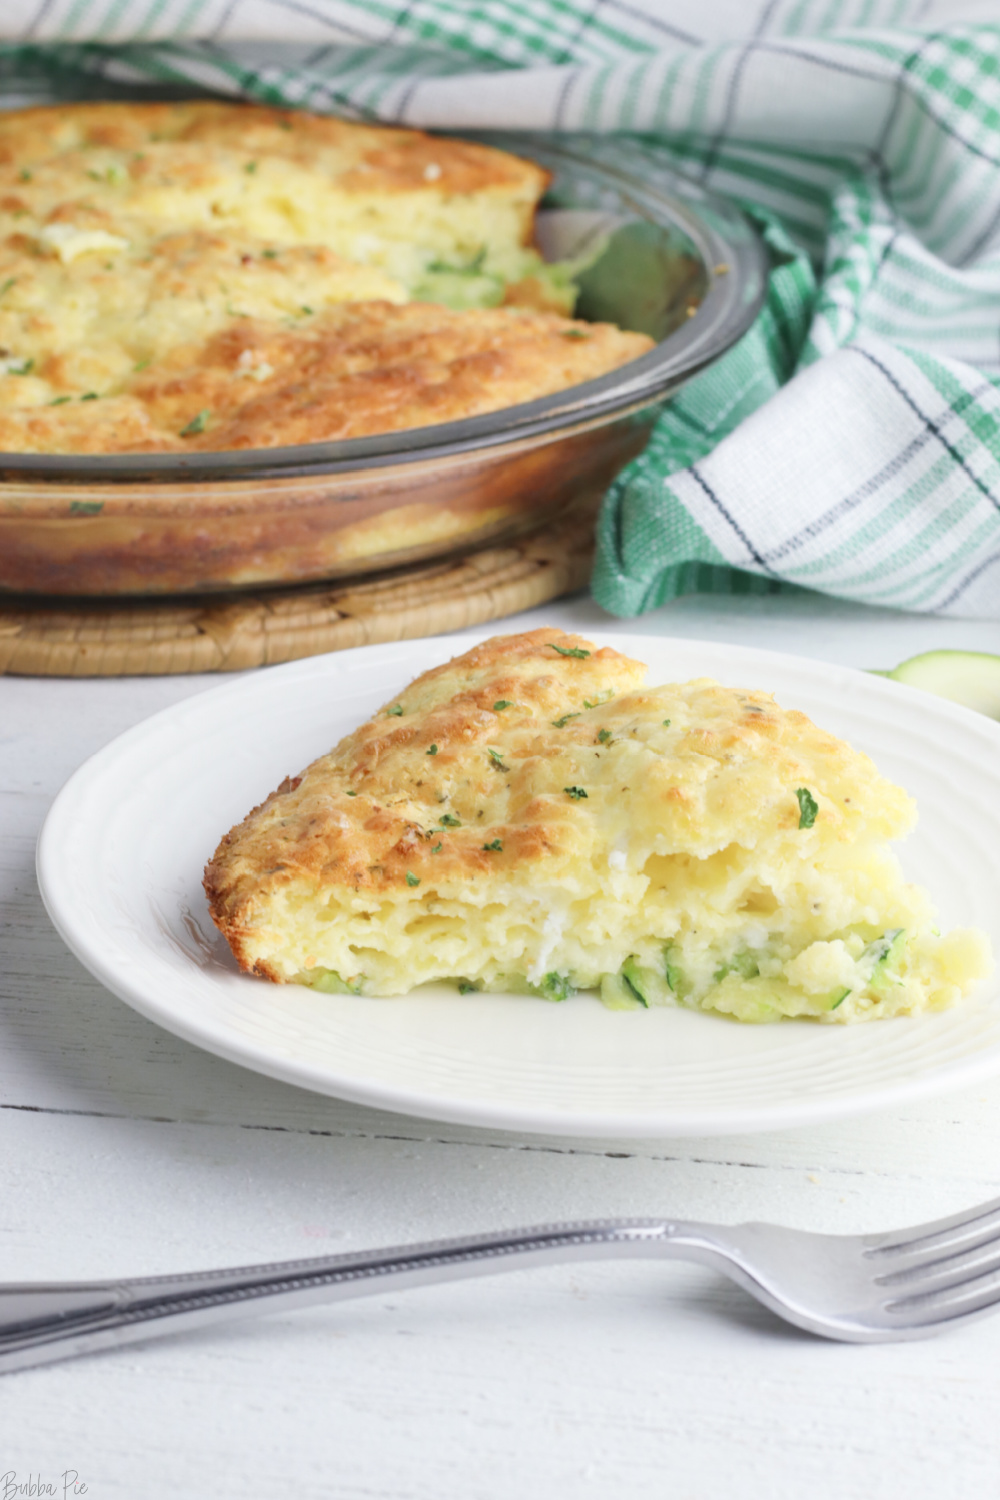 Bisquick Zucchini Quiche Pie makes a great vegetarian main dish or side dish.